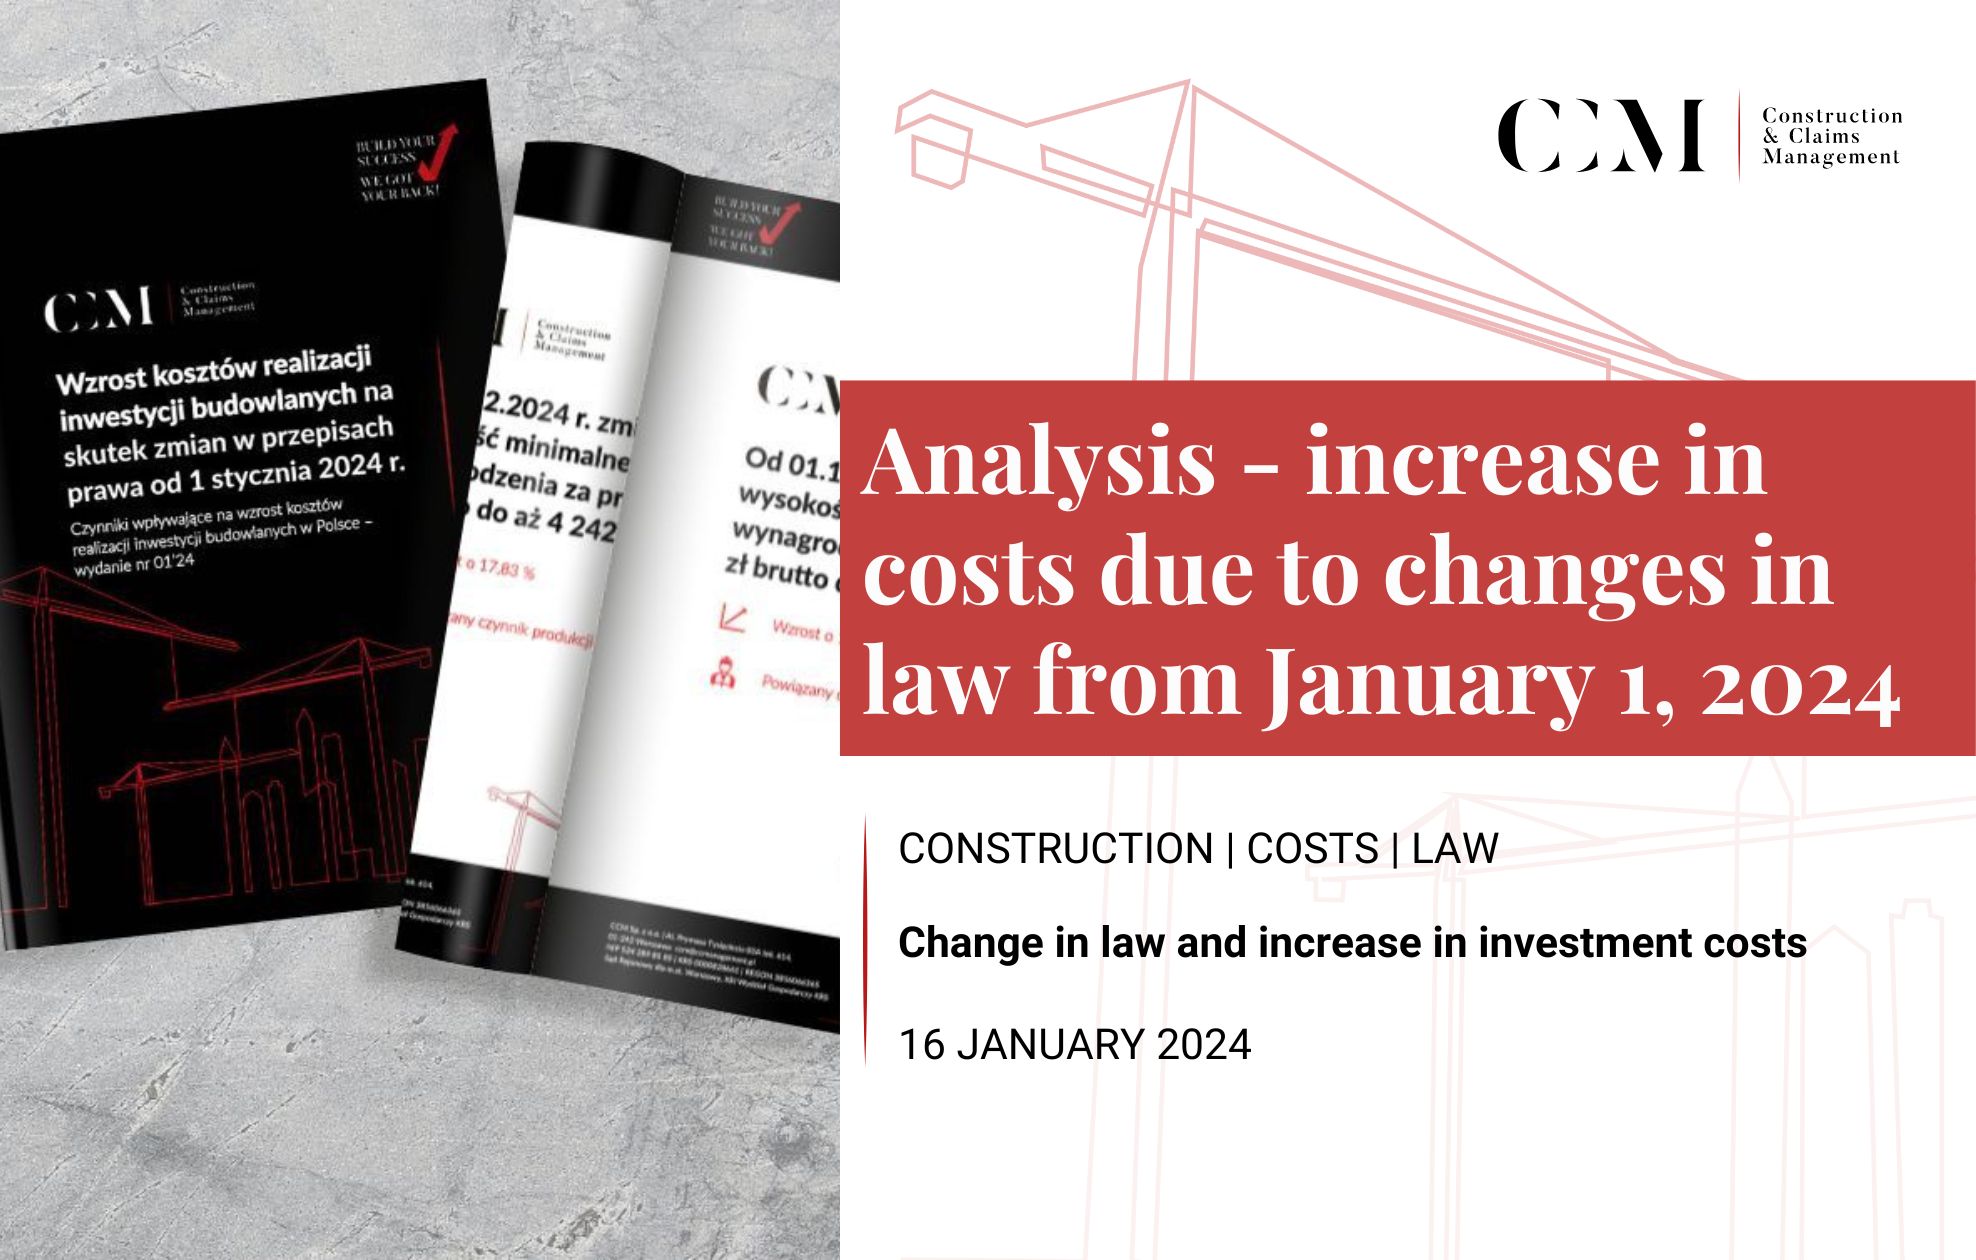 ANALYSIS - INCREASE IN THE COSTS OF IMPLEMENTING CONSTRUCTION INVESTMENTS AS A RESULT OF CHANGES IN LAW FROM JANUARY 1, 2024